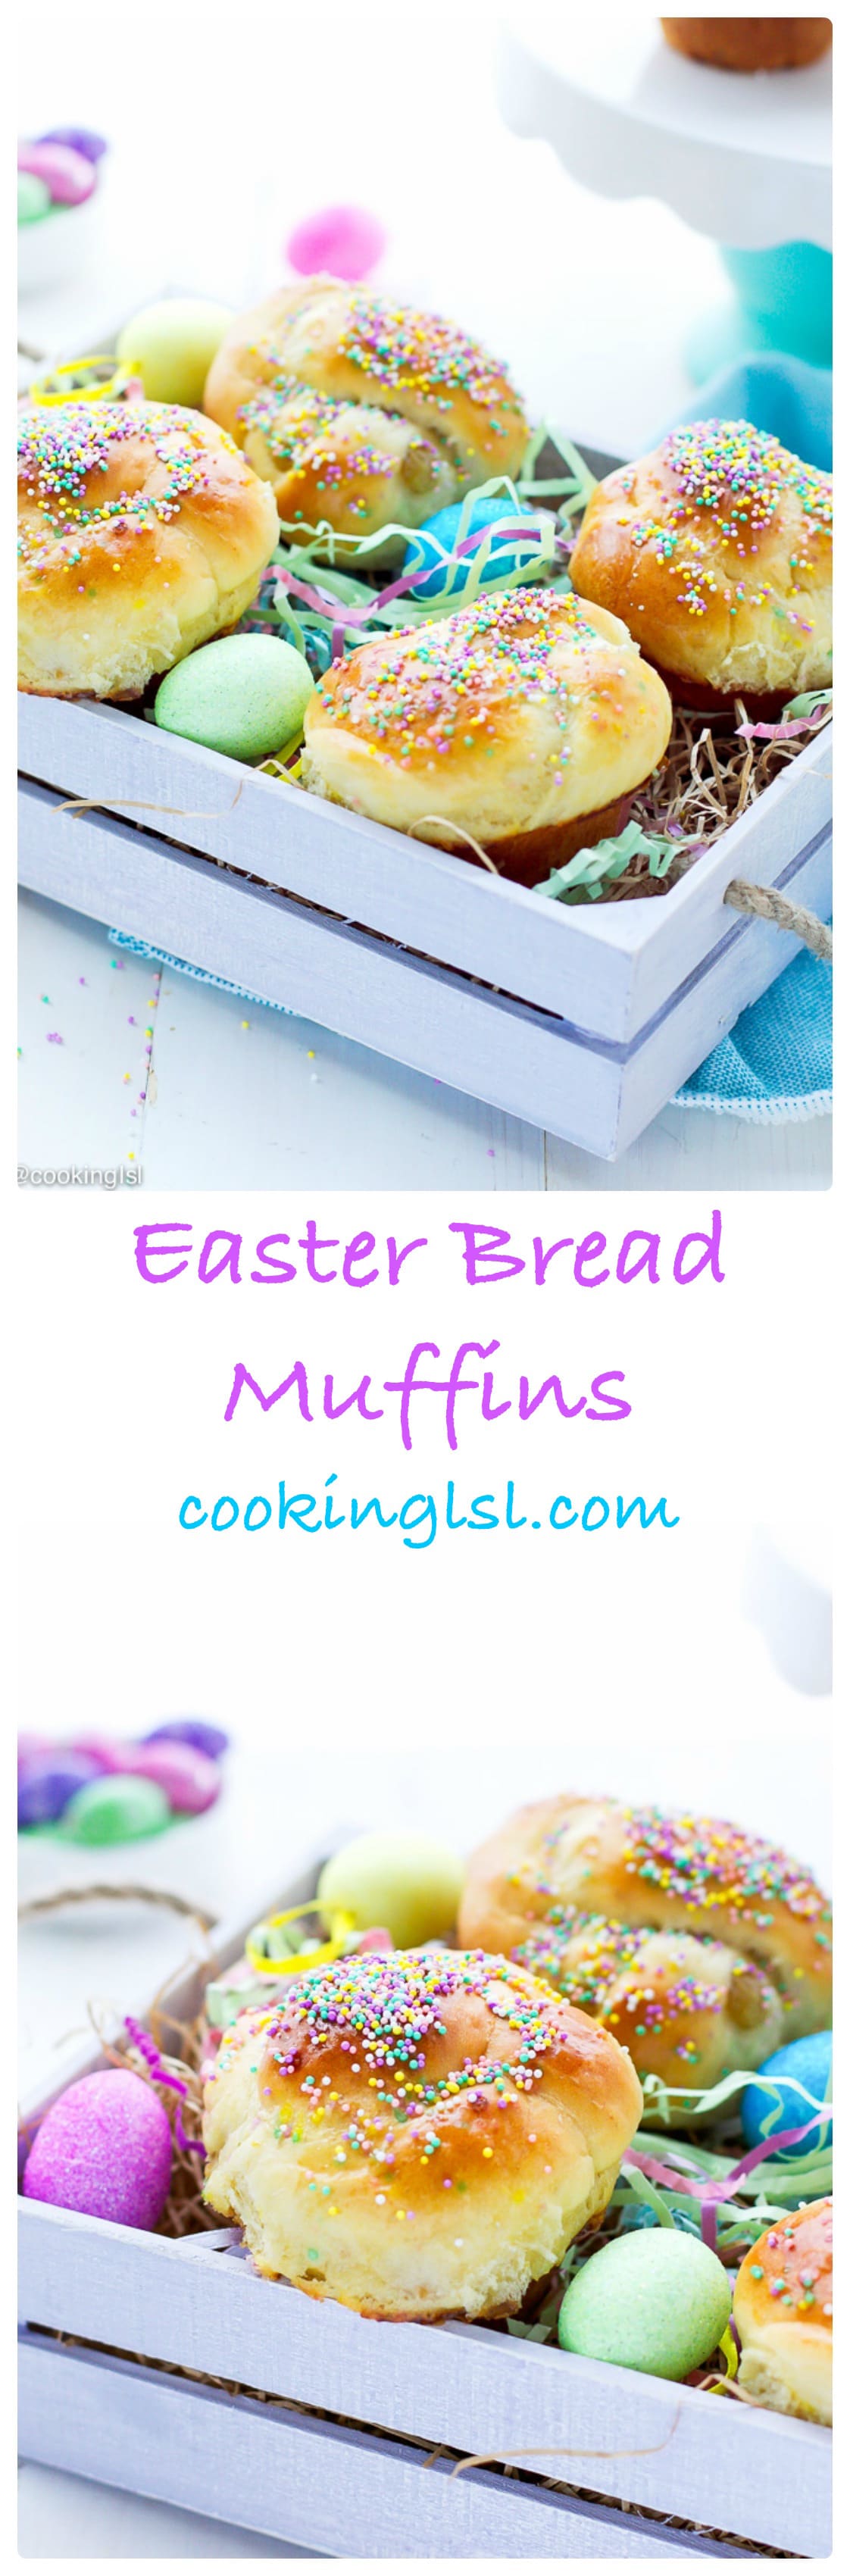 Easter-bread-muffins-bob's-red-mill